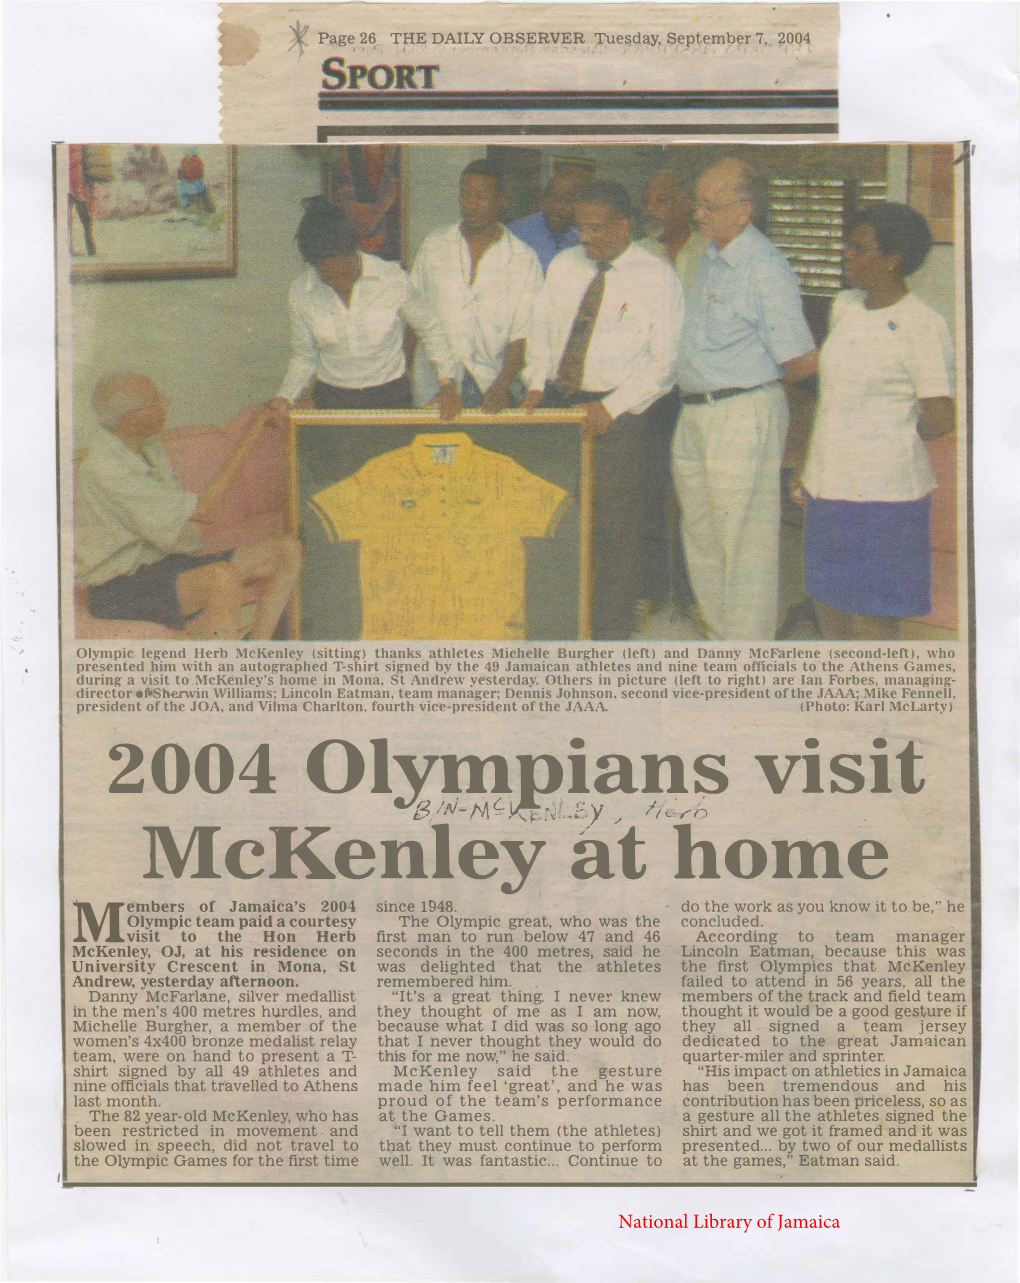 2004 Olympians Visit Mckenley at Home